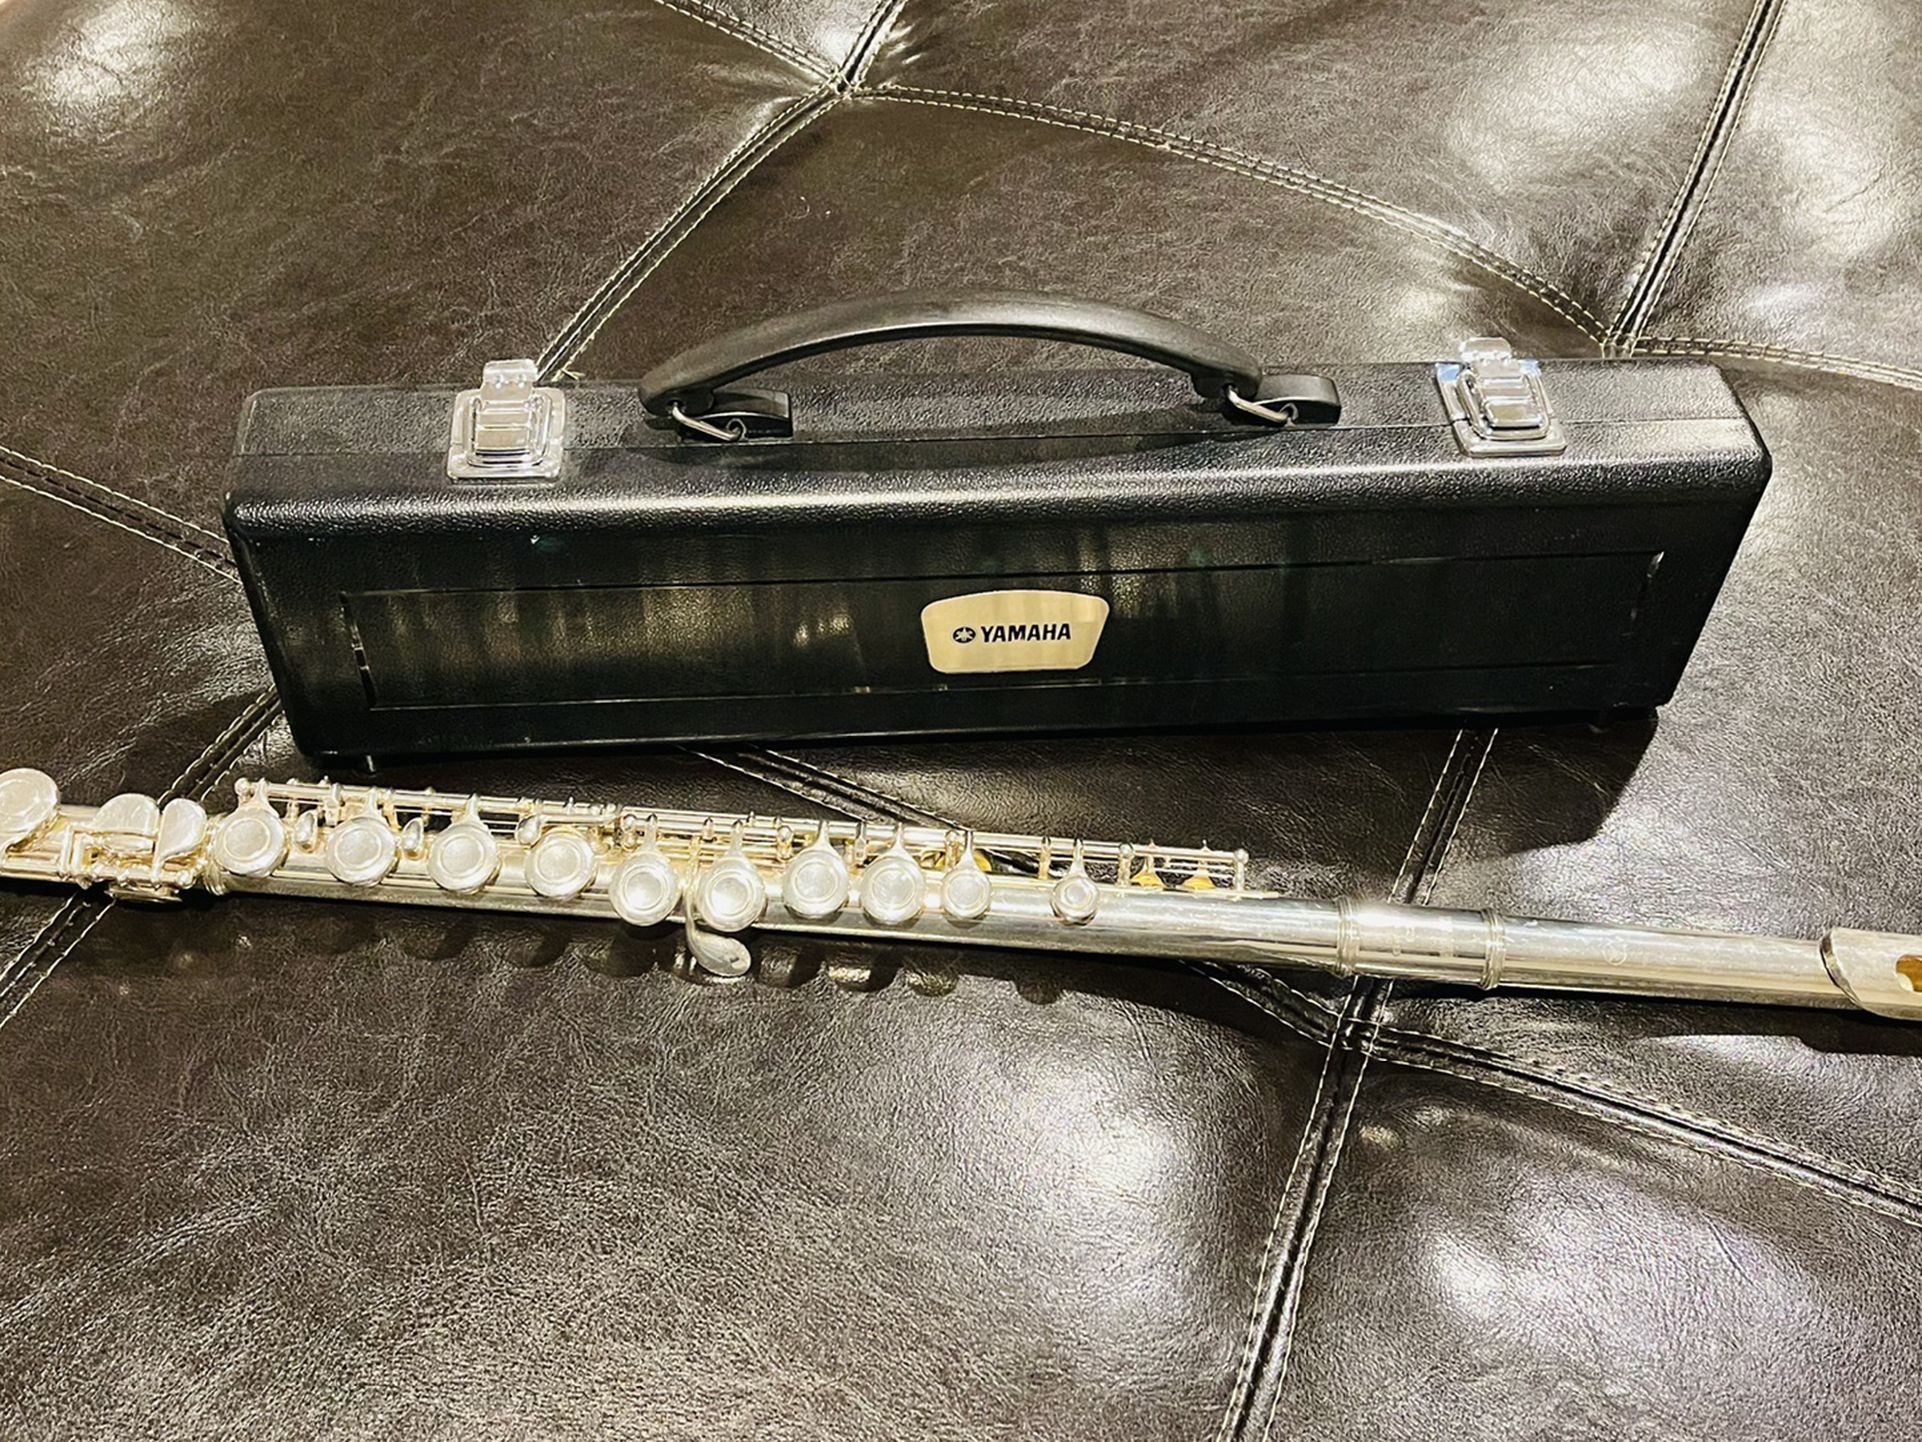 Yamaha  Flute for Sale in Elk Grove Village, IL   OfferUp